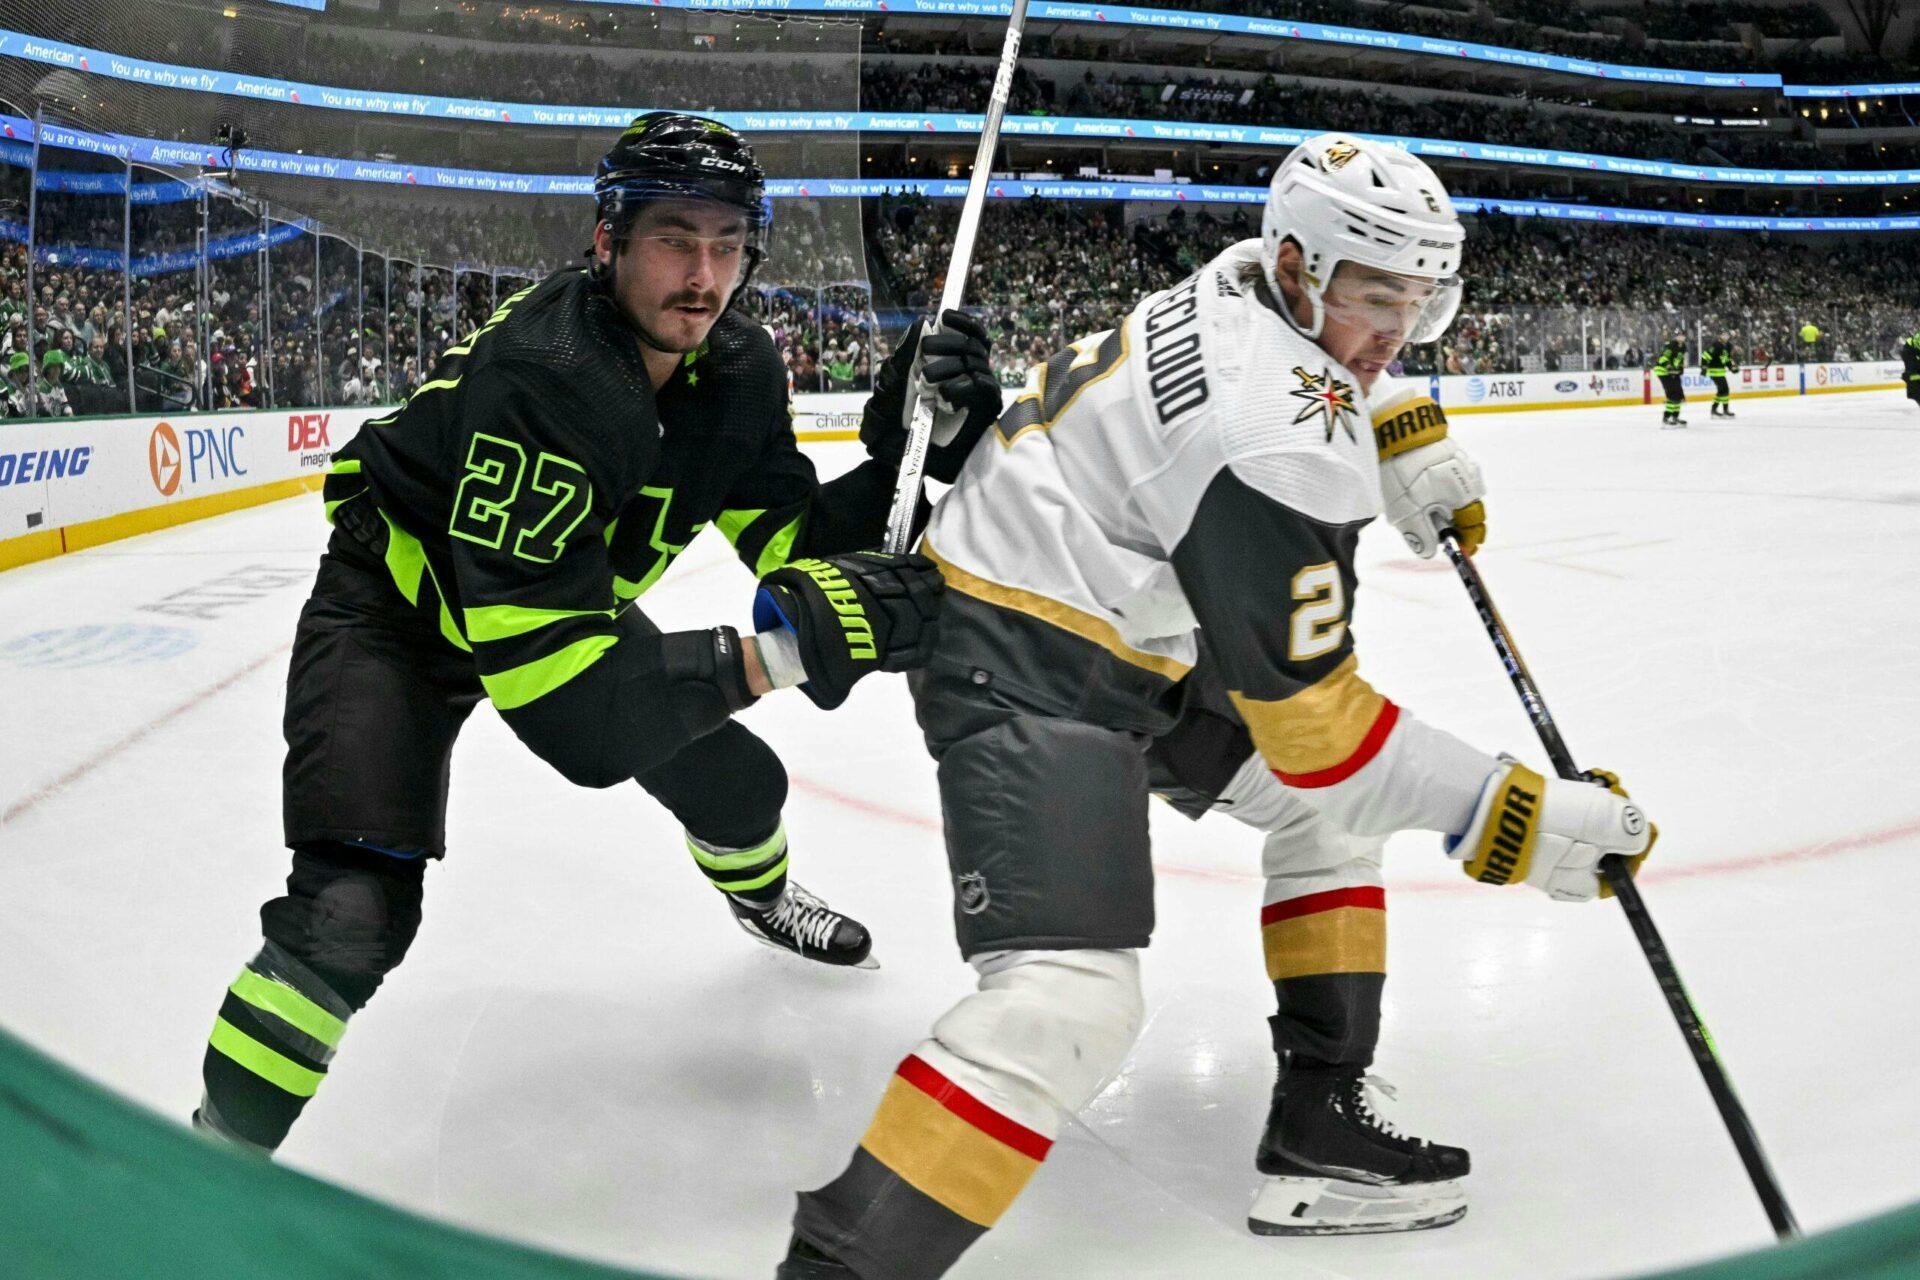 The Golden Knights and Stars battle in Game 4 tonight in Las Vegas